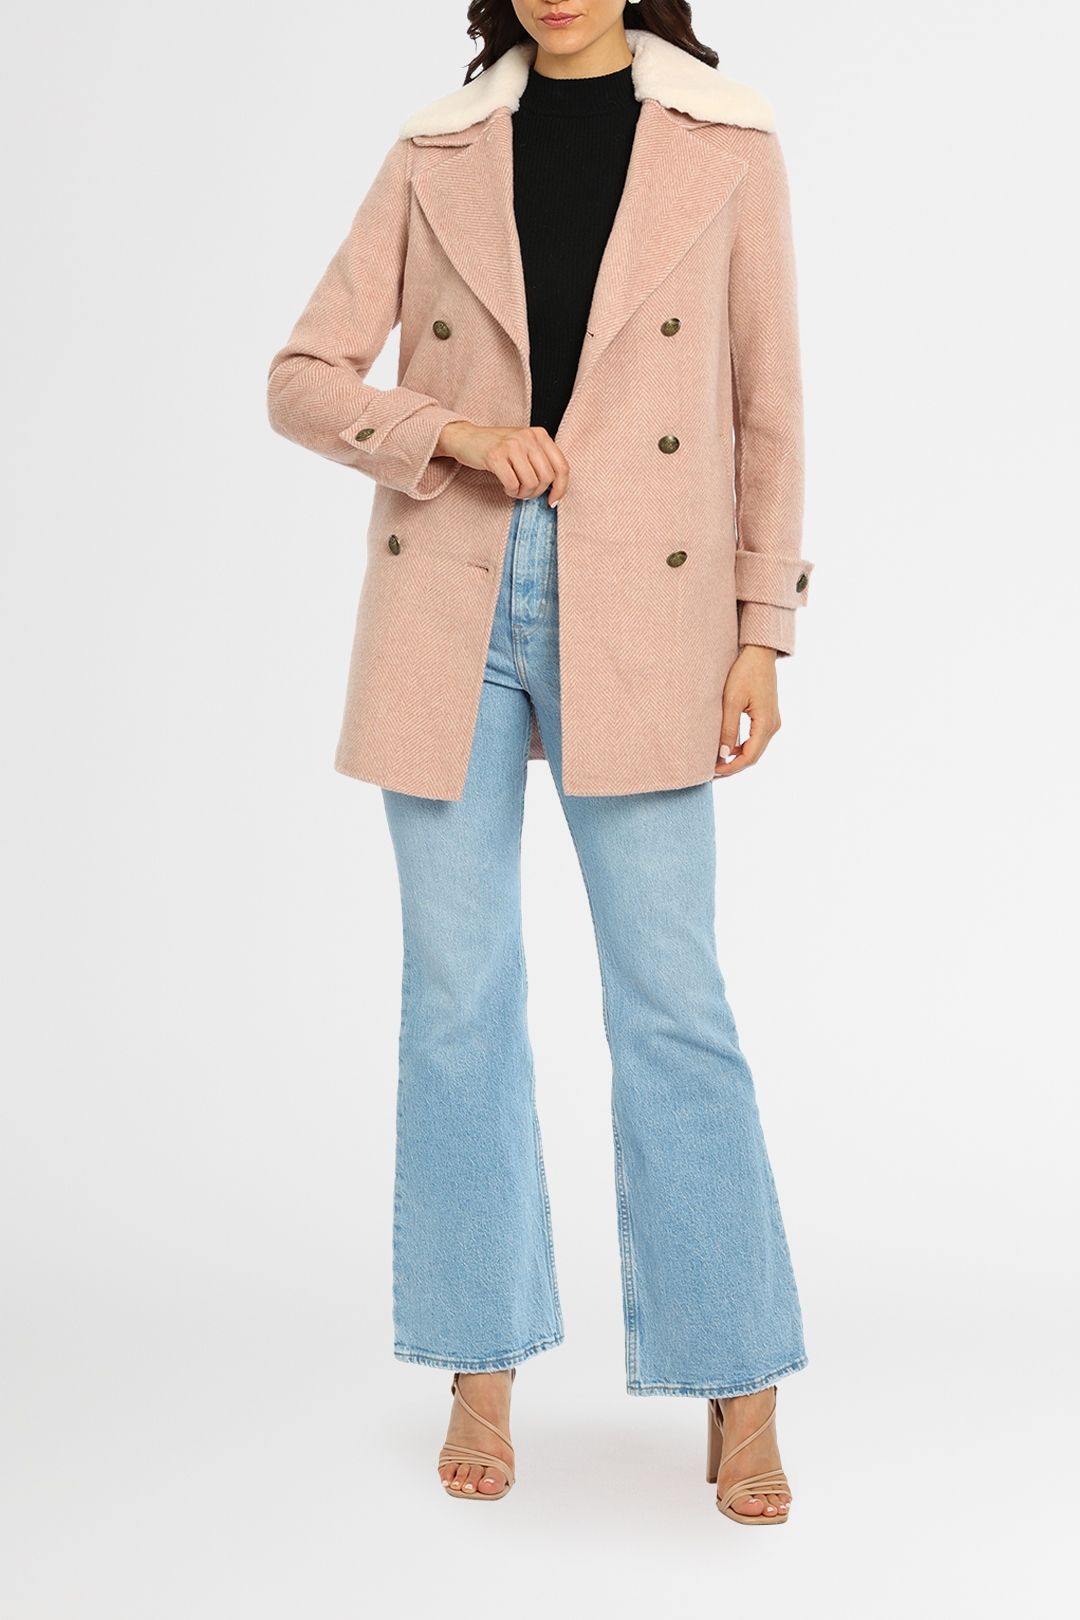 Belle and Bloom Liberty Sherpa Collar Coat